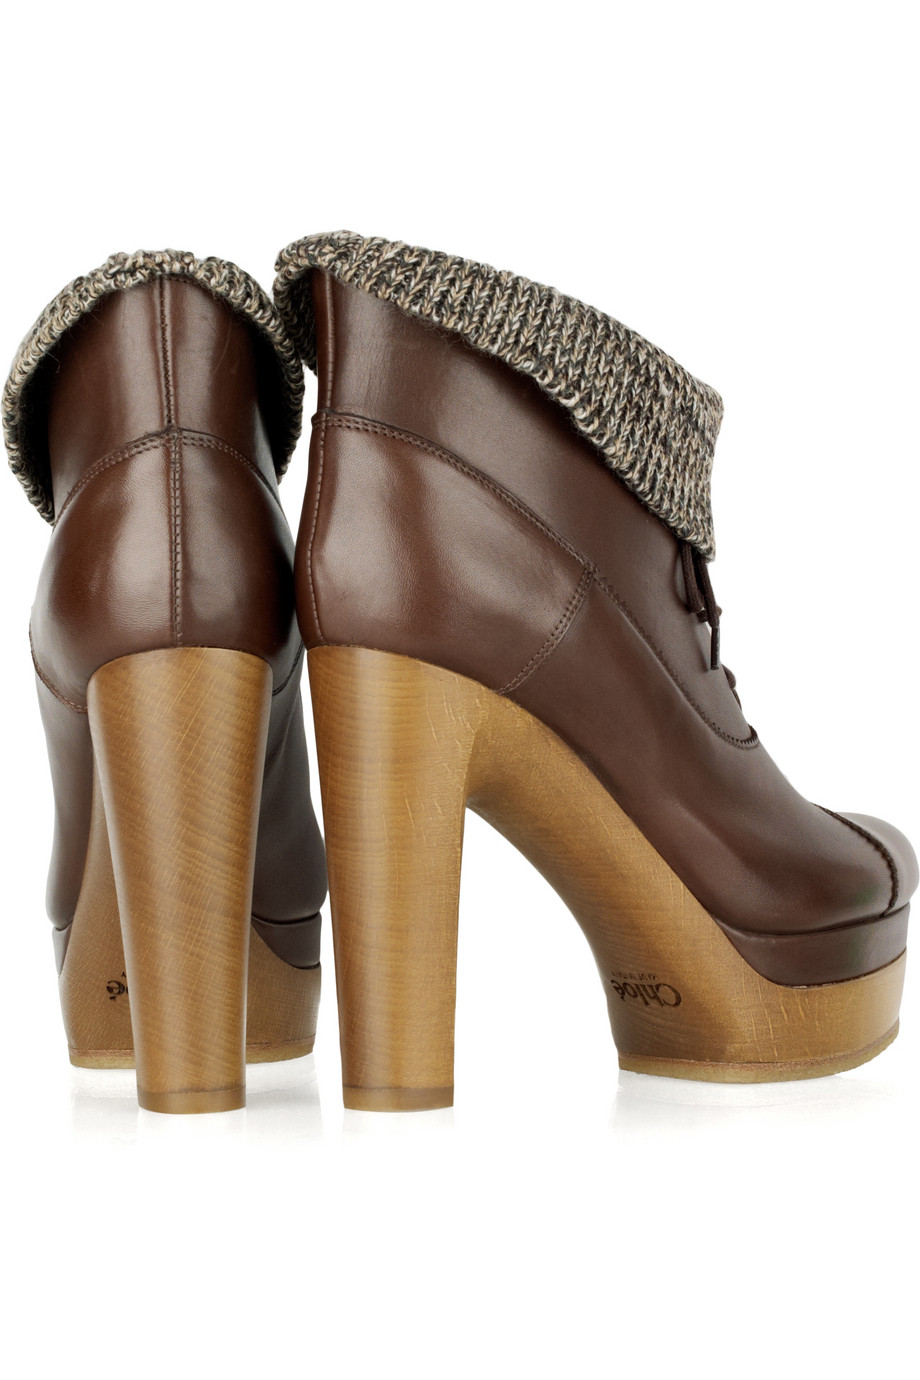 Chloé Leather Platform Ankle Boots in Brown Lyst